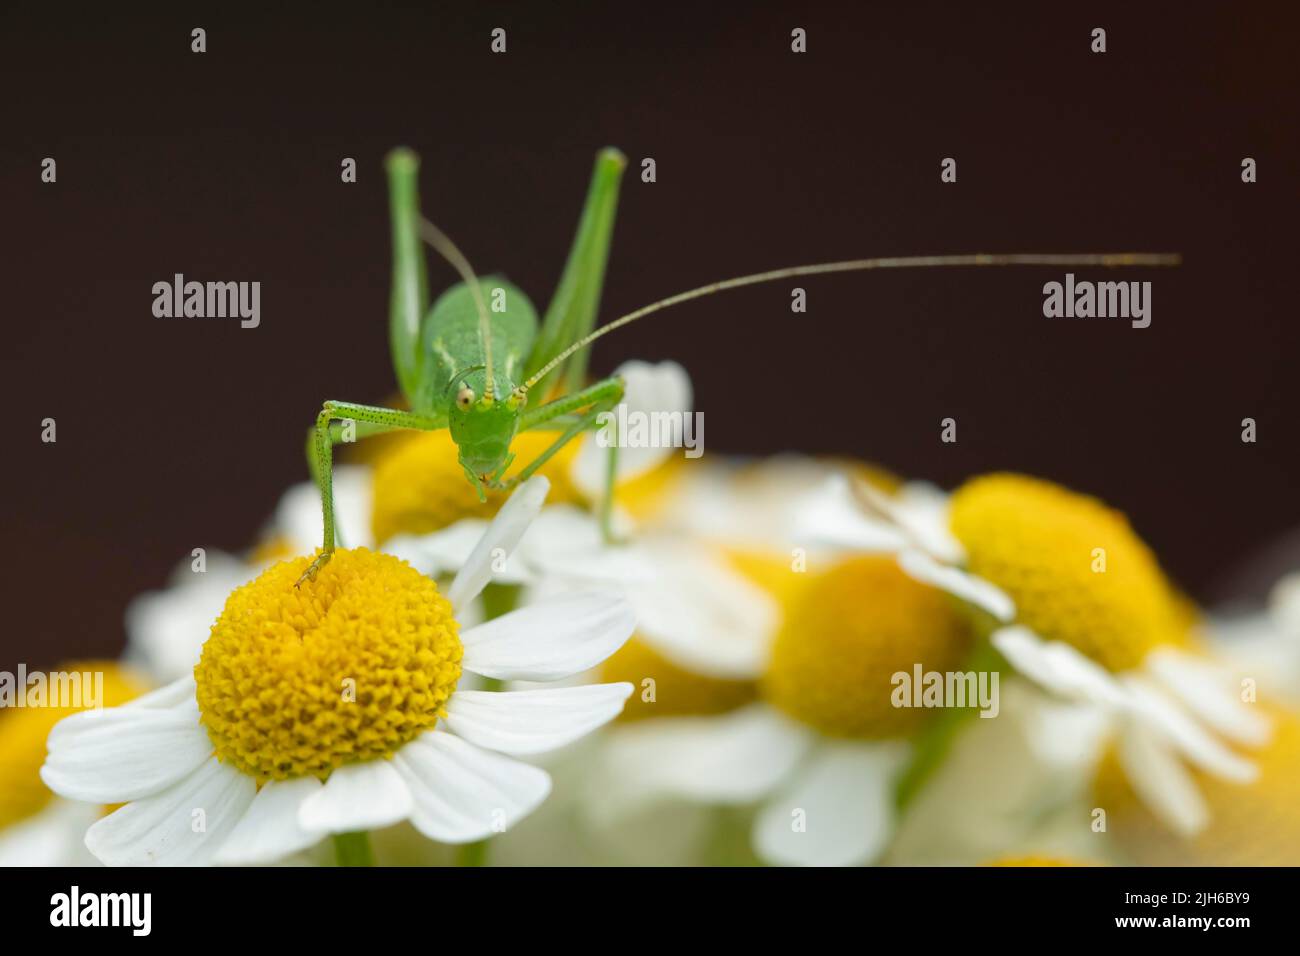 Speckled bush cricket (Leptophyes punctatissima) adult insect on Daisy flowers, Suffolk, England, United Kingdom Stock Photo